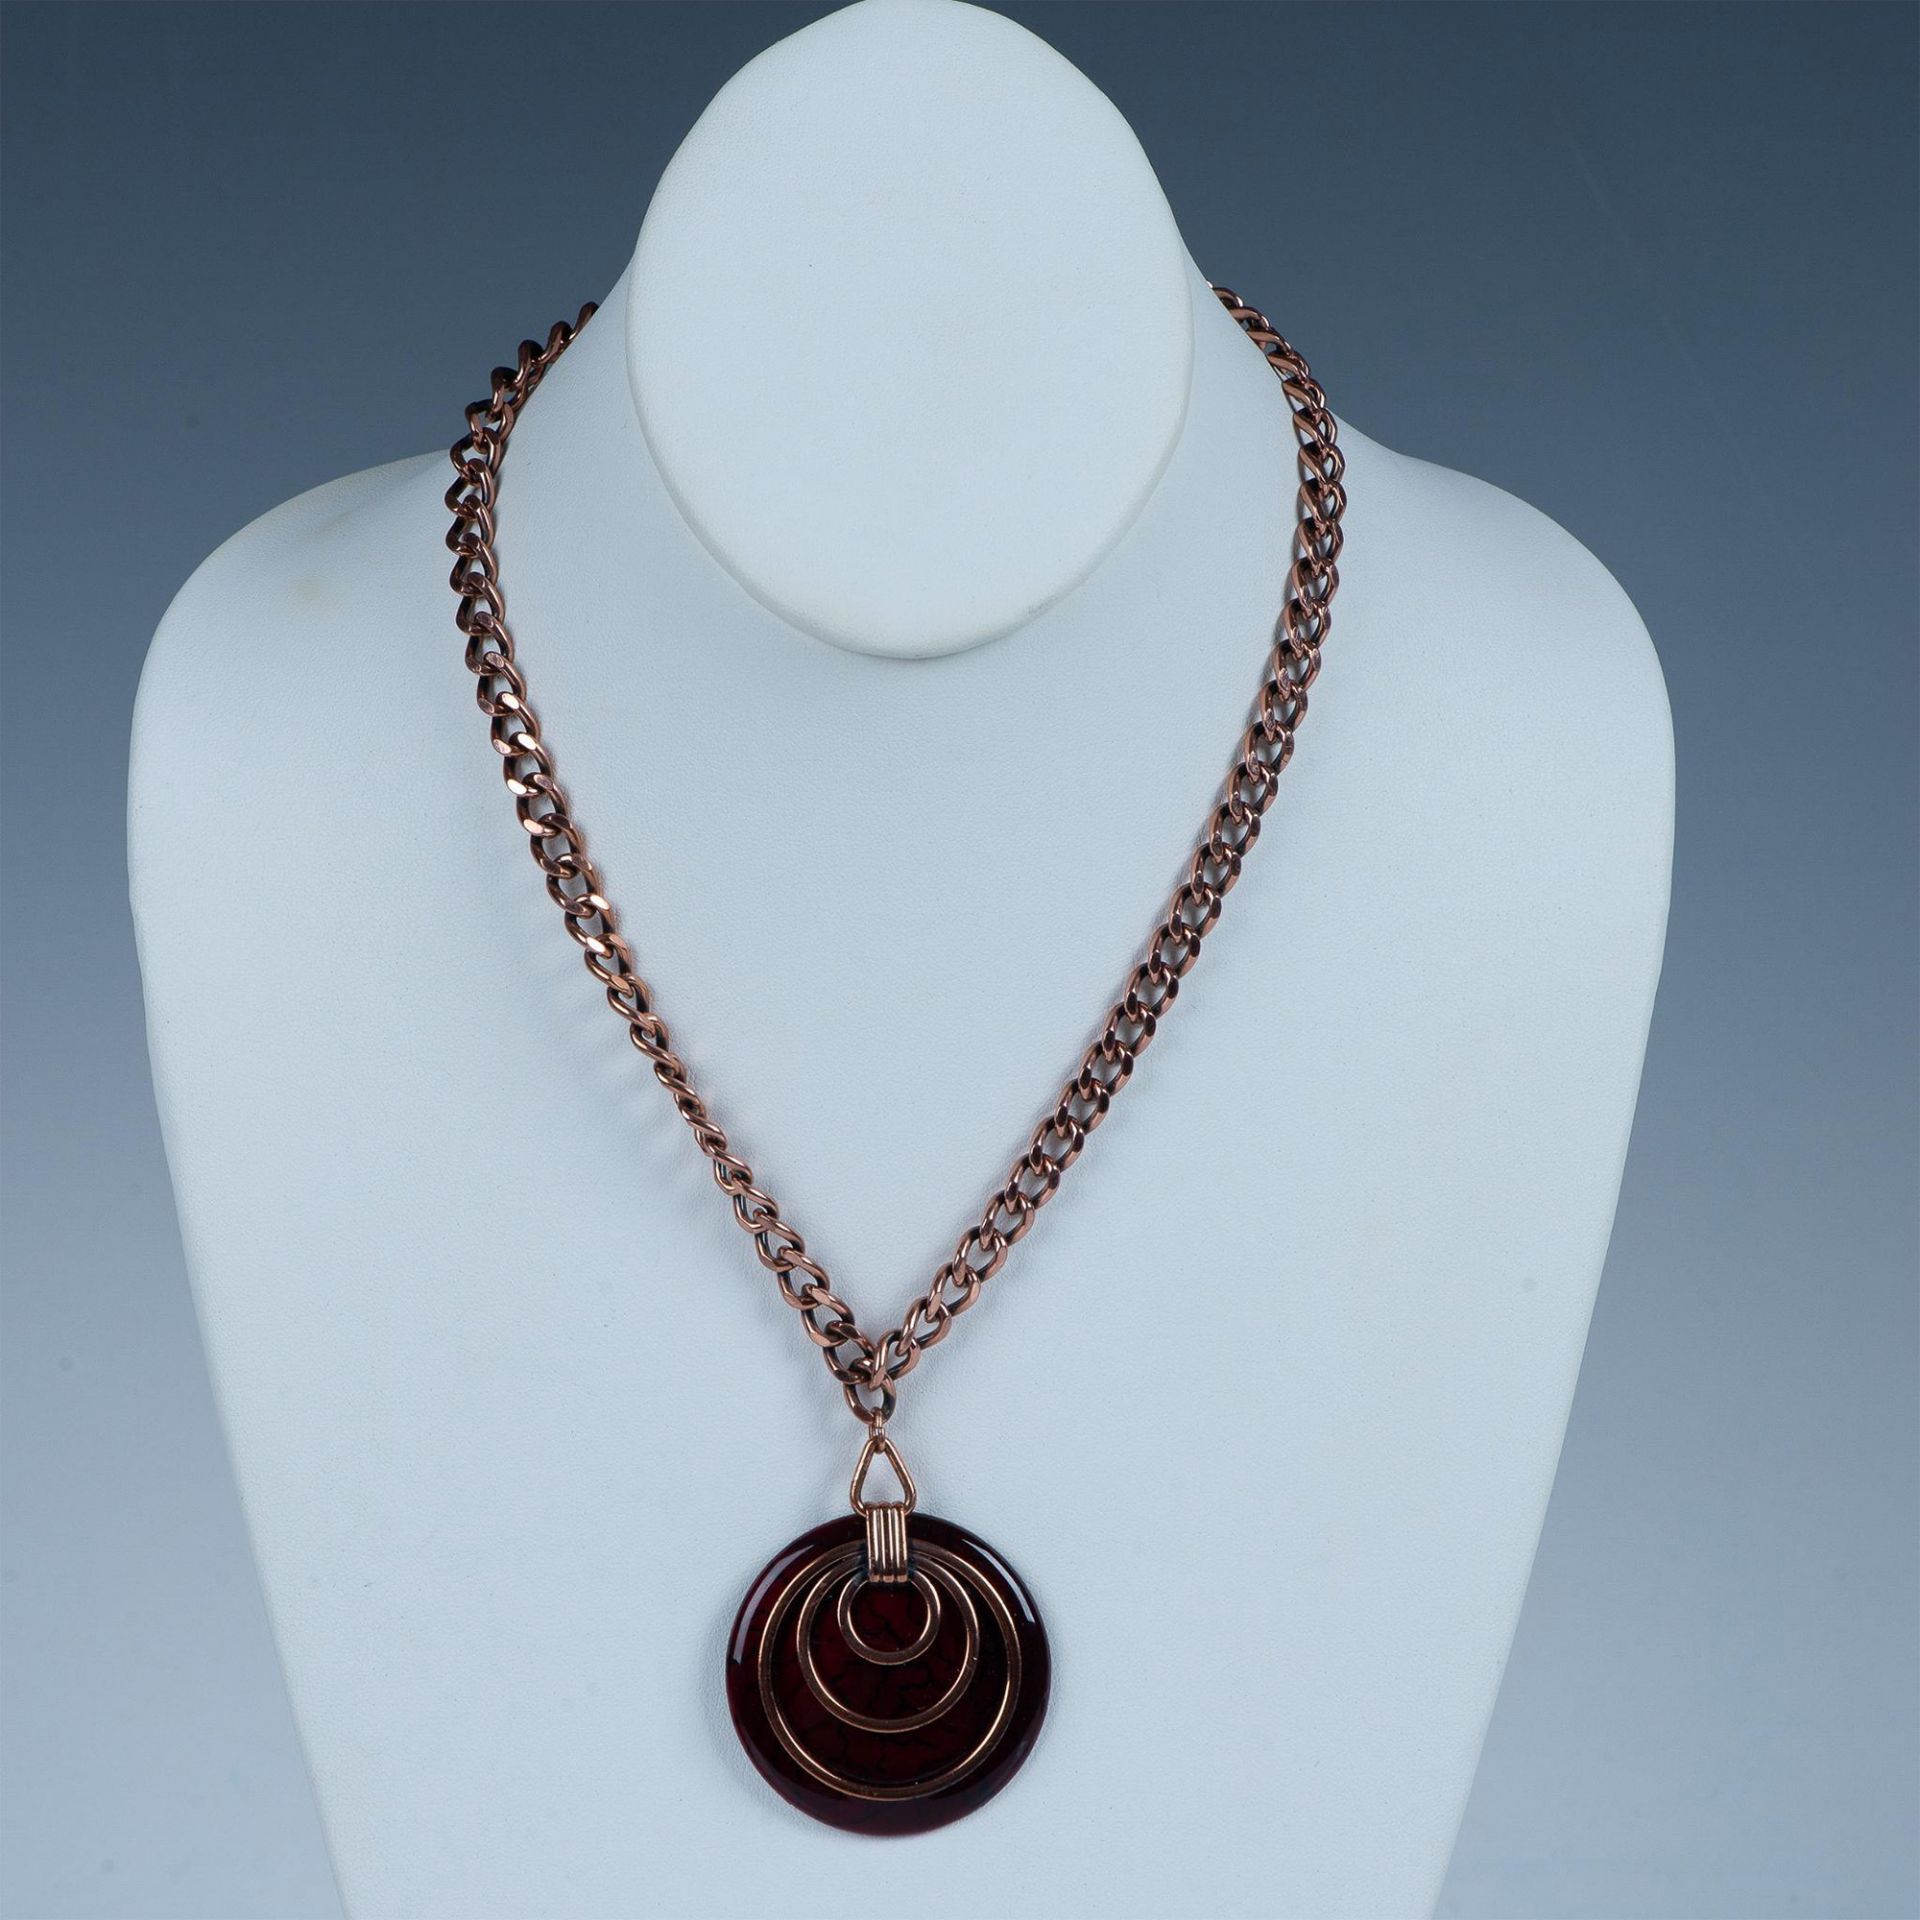 Matisse Copper Tortoise Like Saturn Necklace - Image 2 of 5